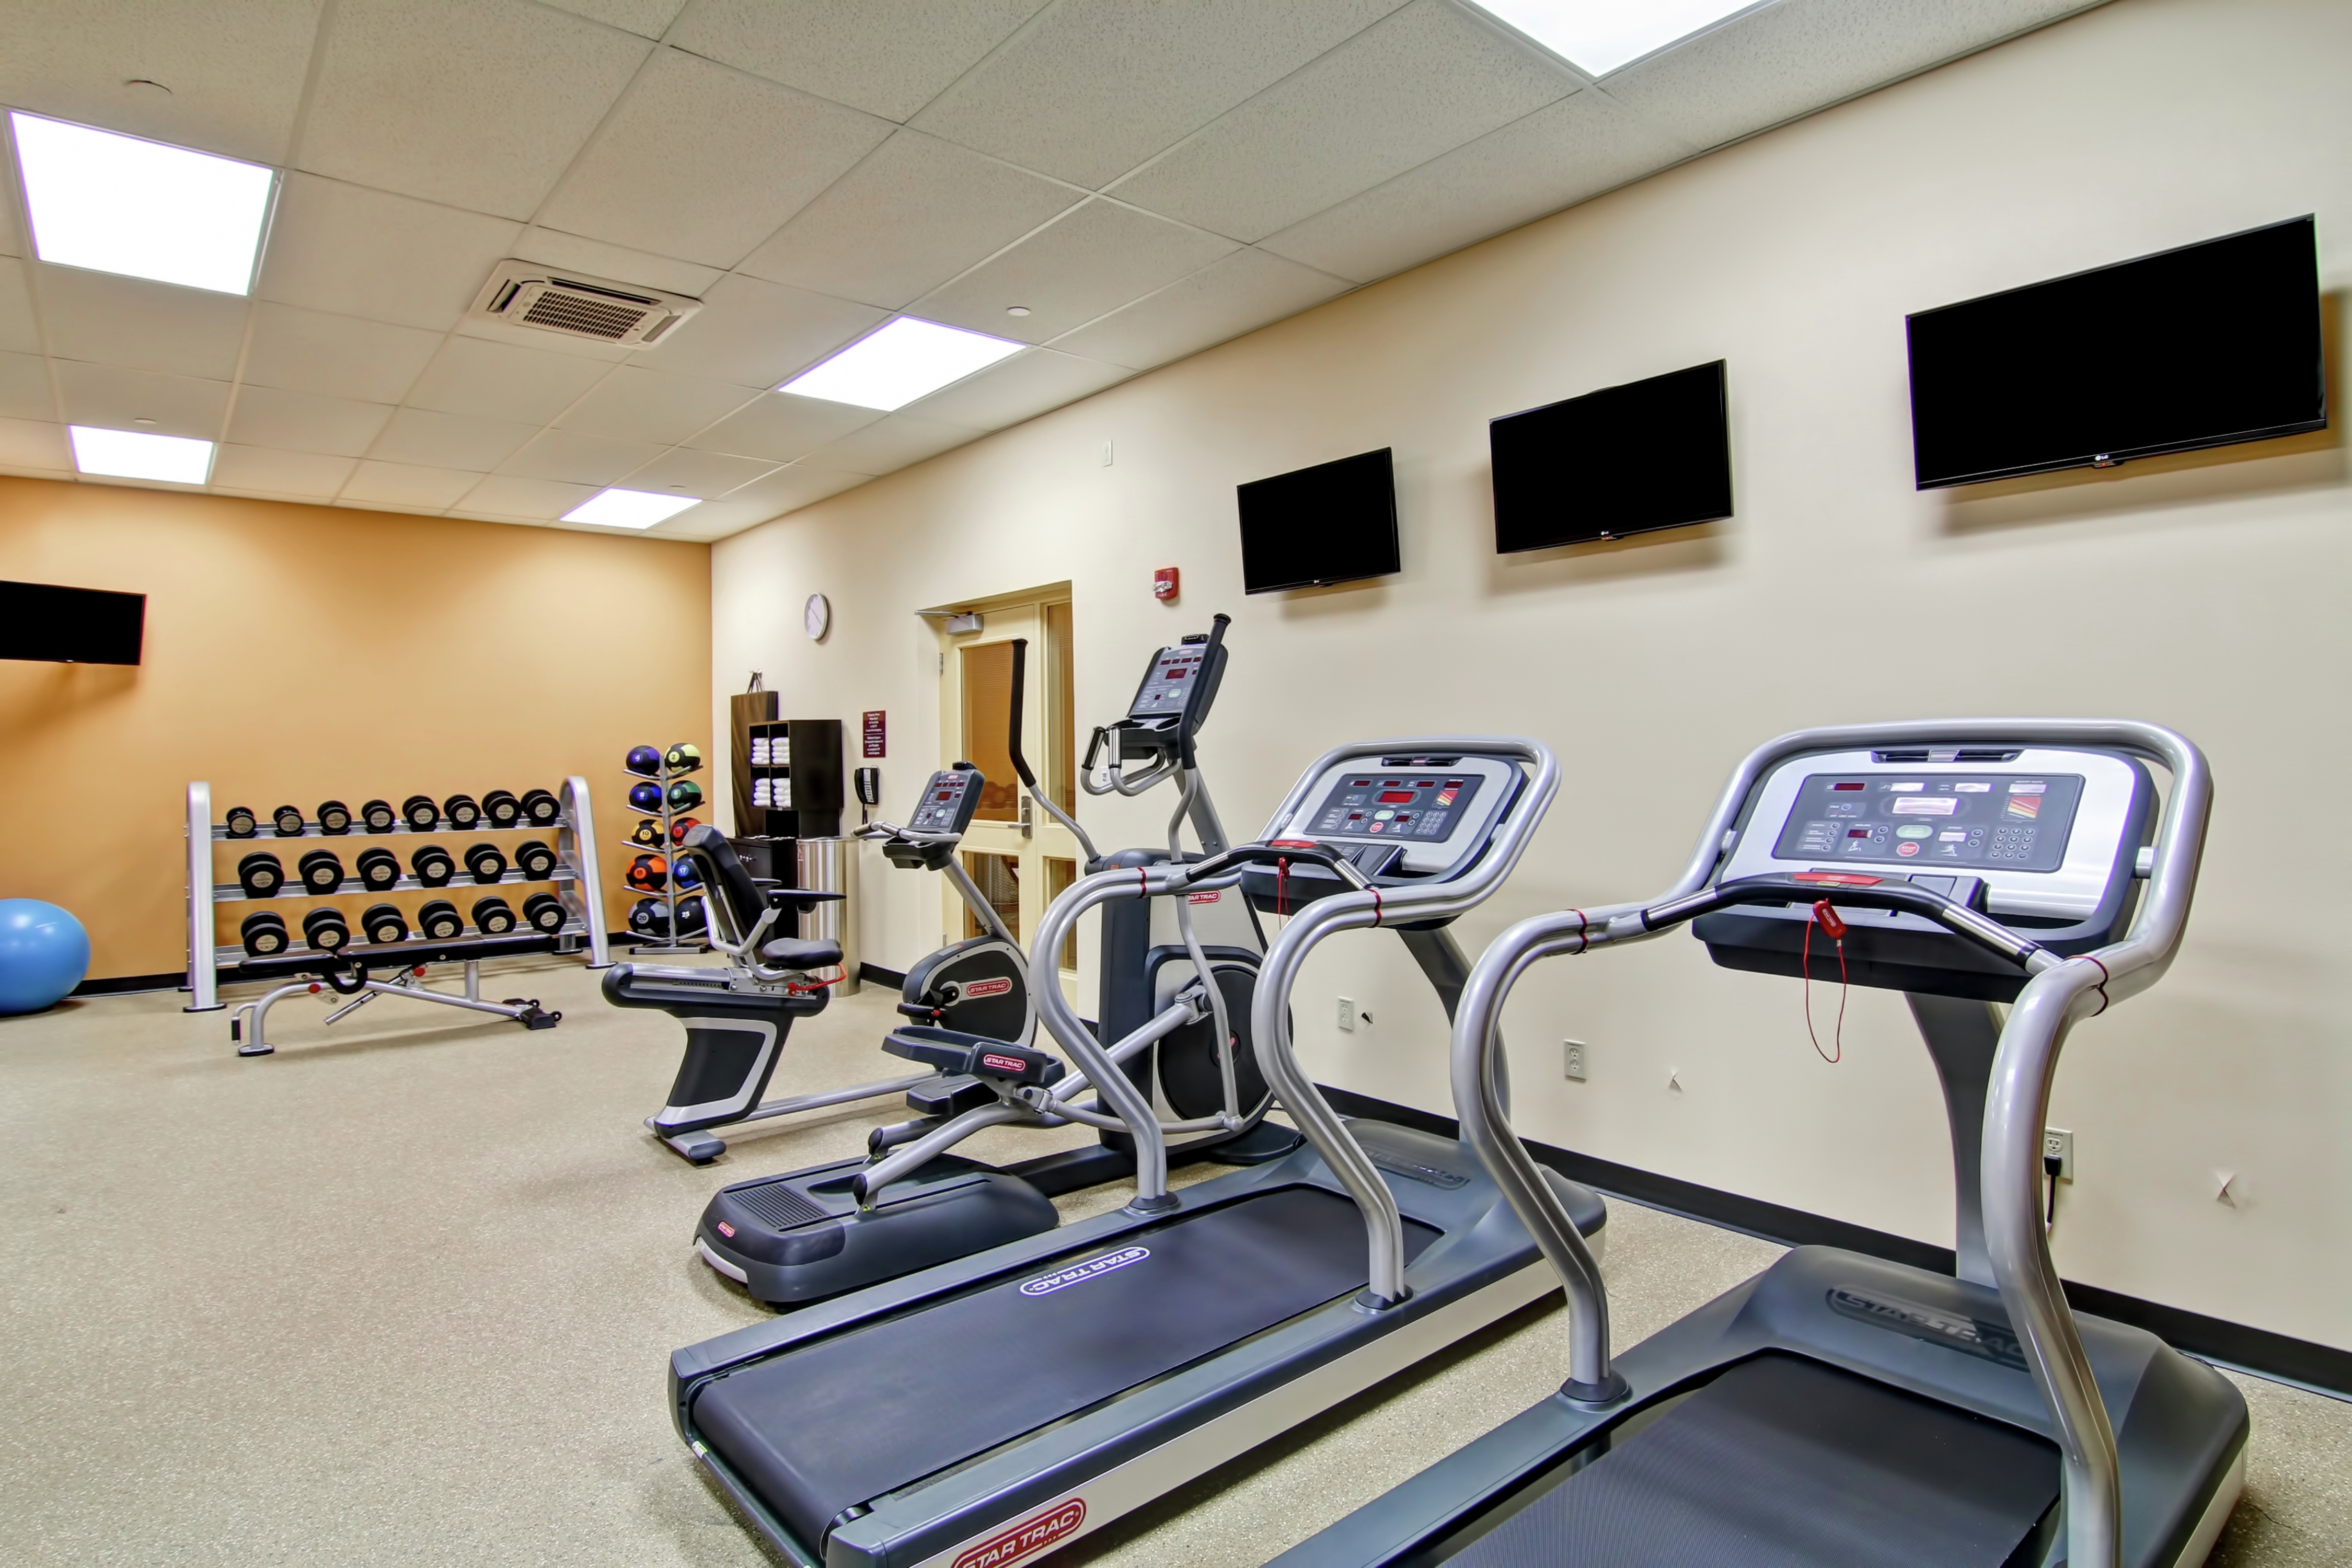 Lower Level Fitness Room With TVs, Weight Bench, Blue Stability Ball, Free Weights, Weight Balls, Water Cooler, Towel Station, and Cardio Equipment